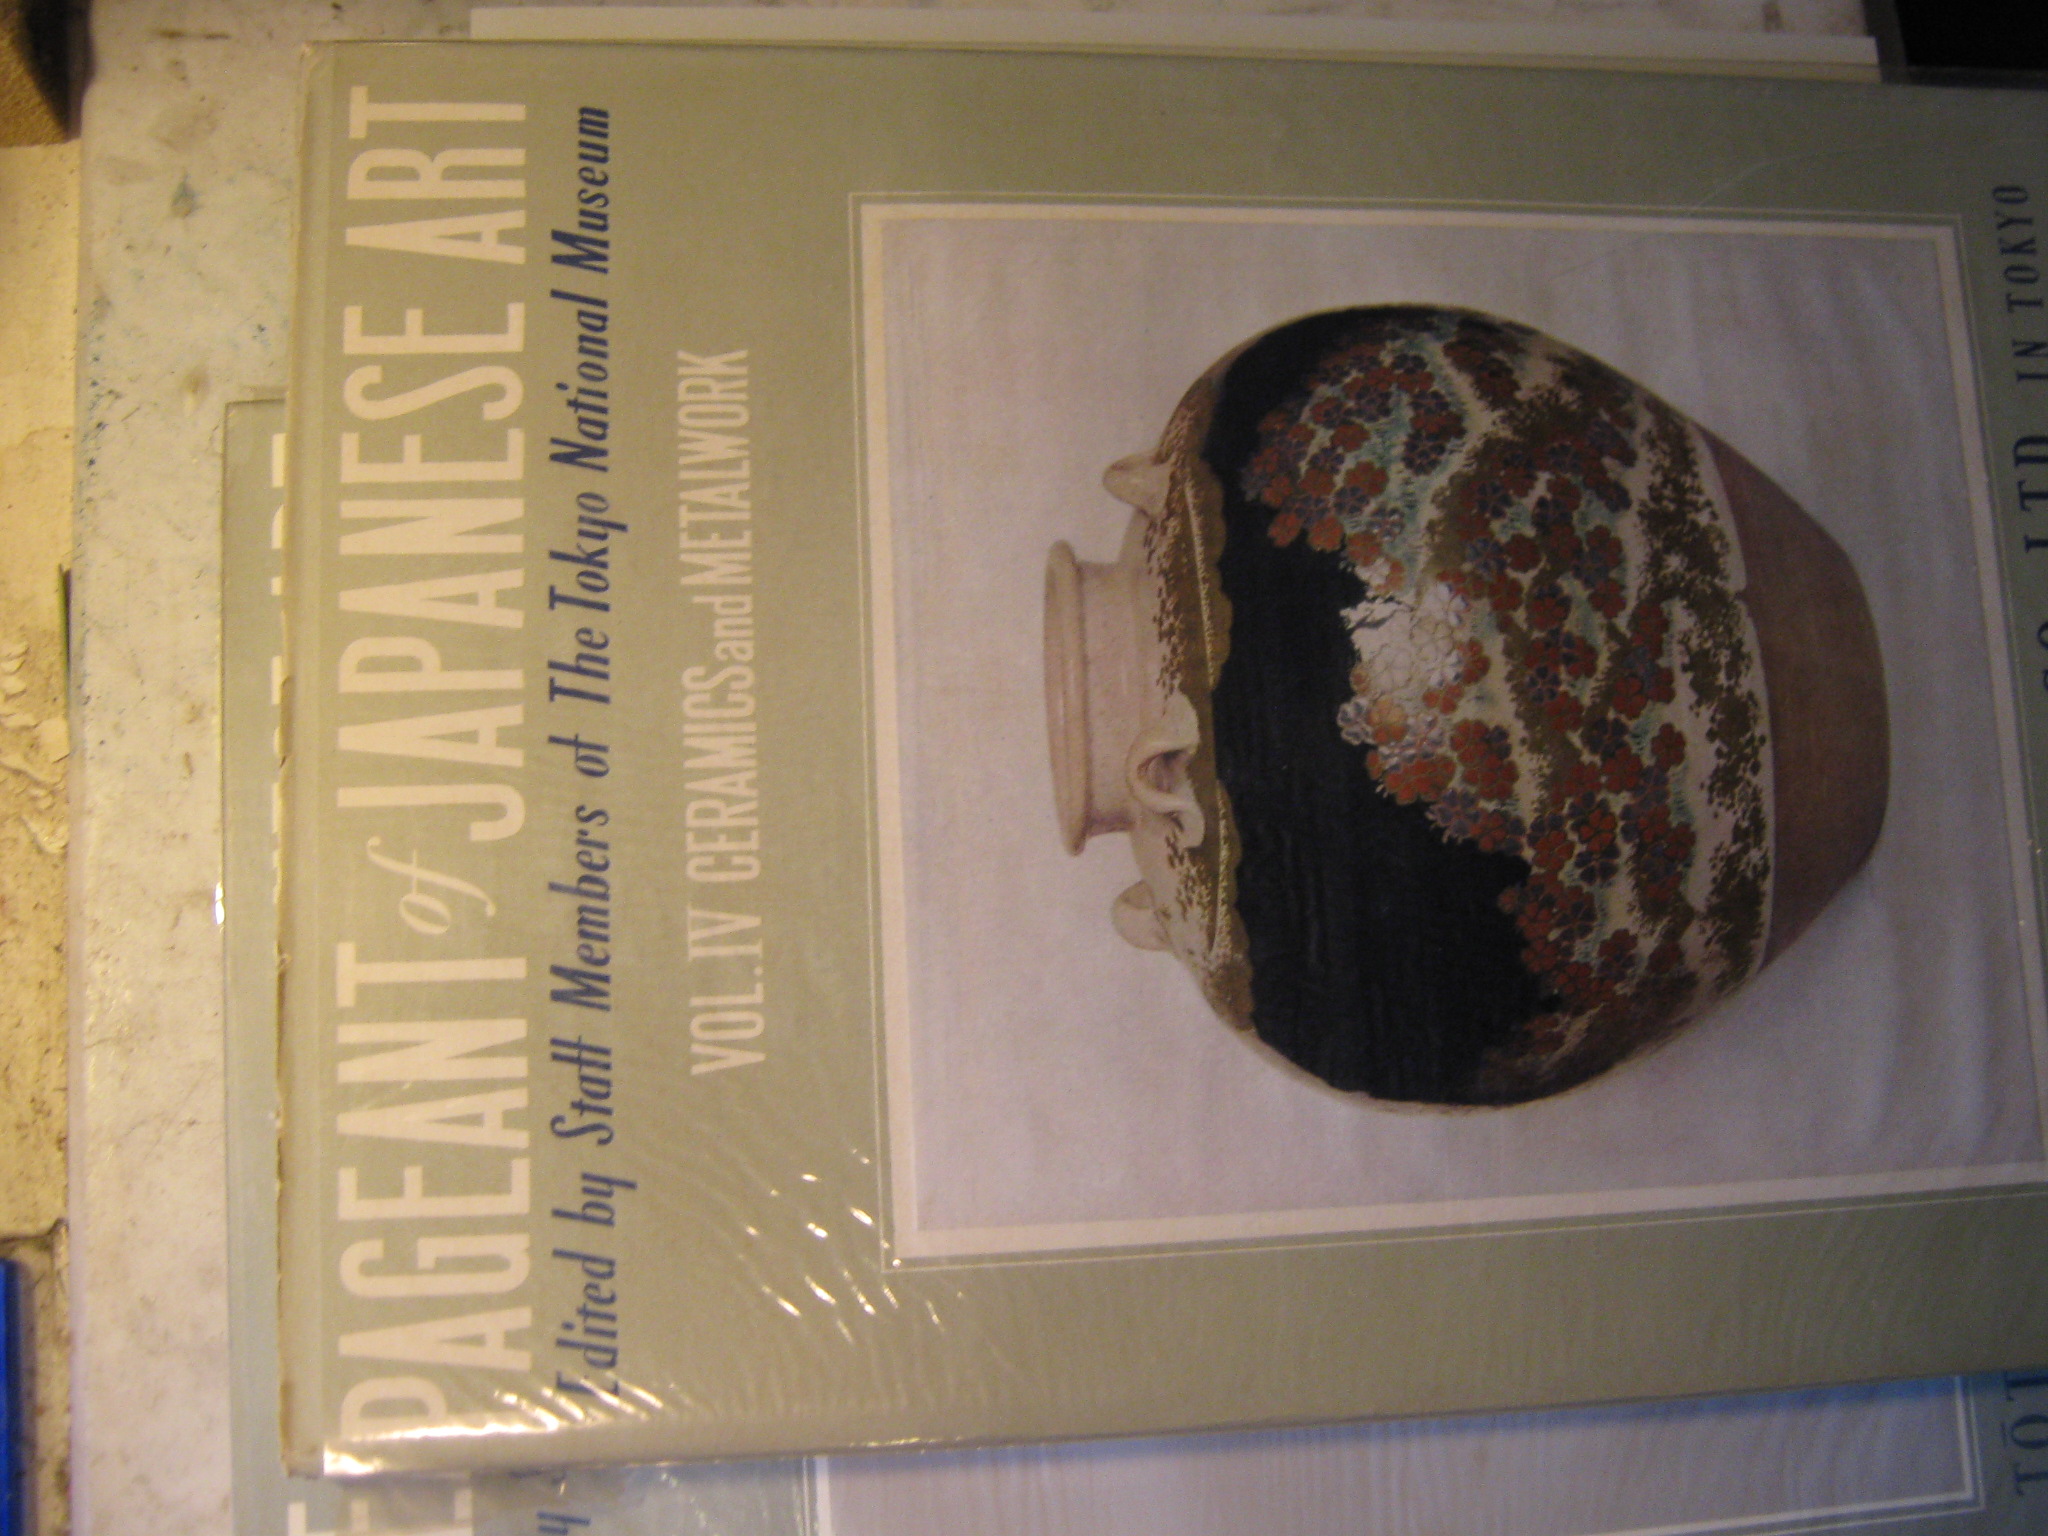 Pageant of Japanese Art (6 volumes) by Edited by Staff Members of